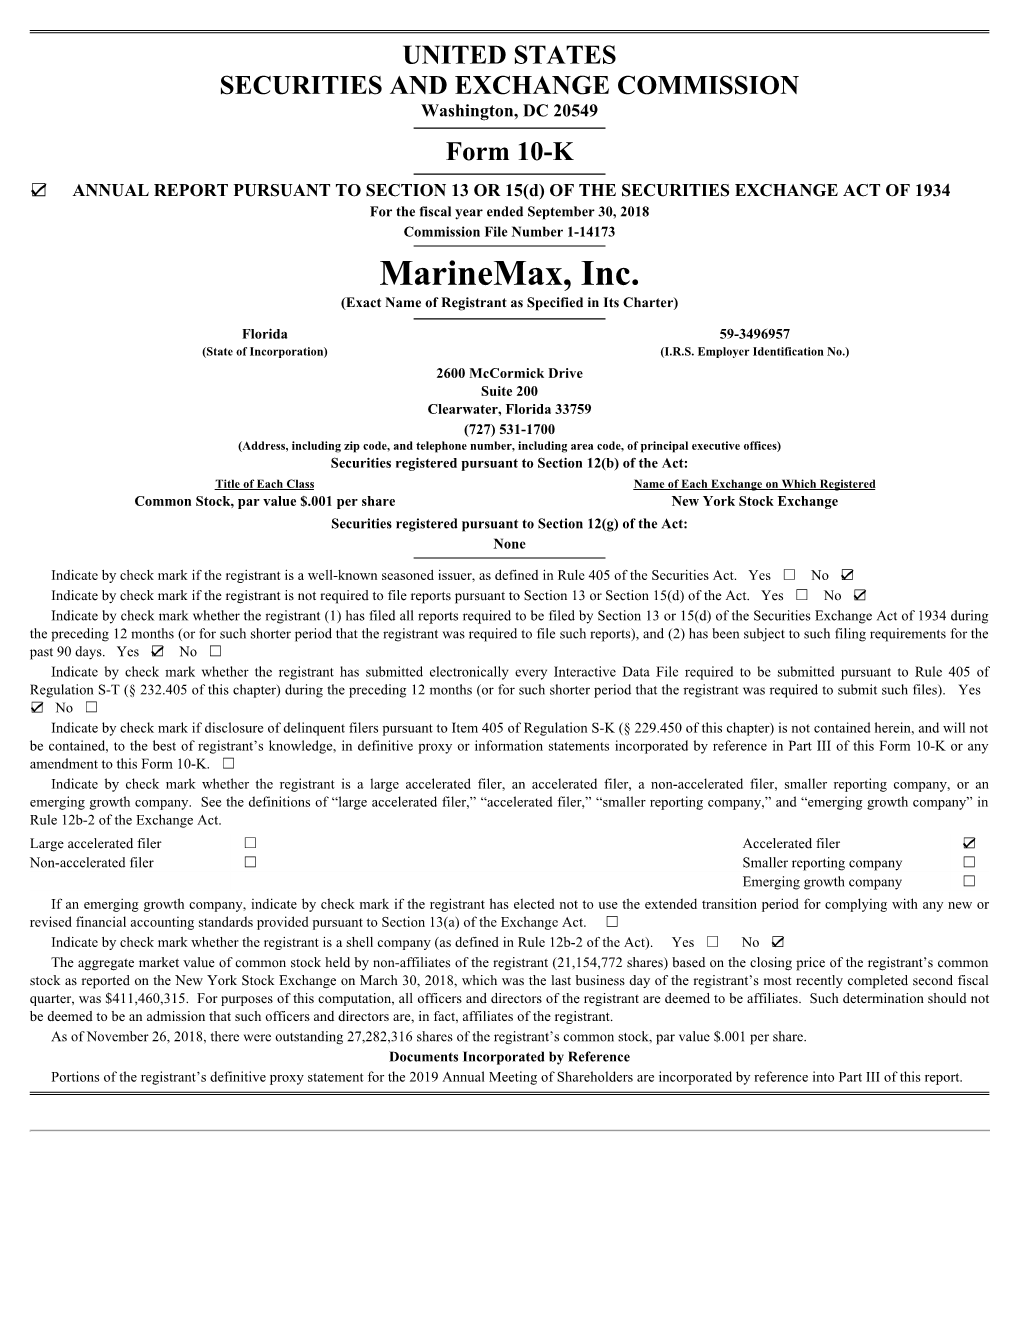 Marinemax, Inc. (Exact Name of Registrant As Specified in Its Charter)